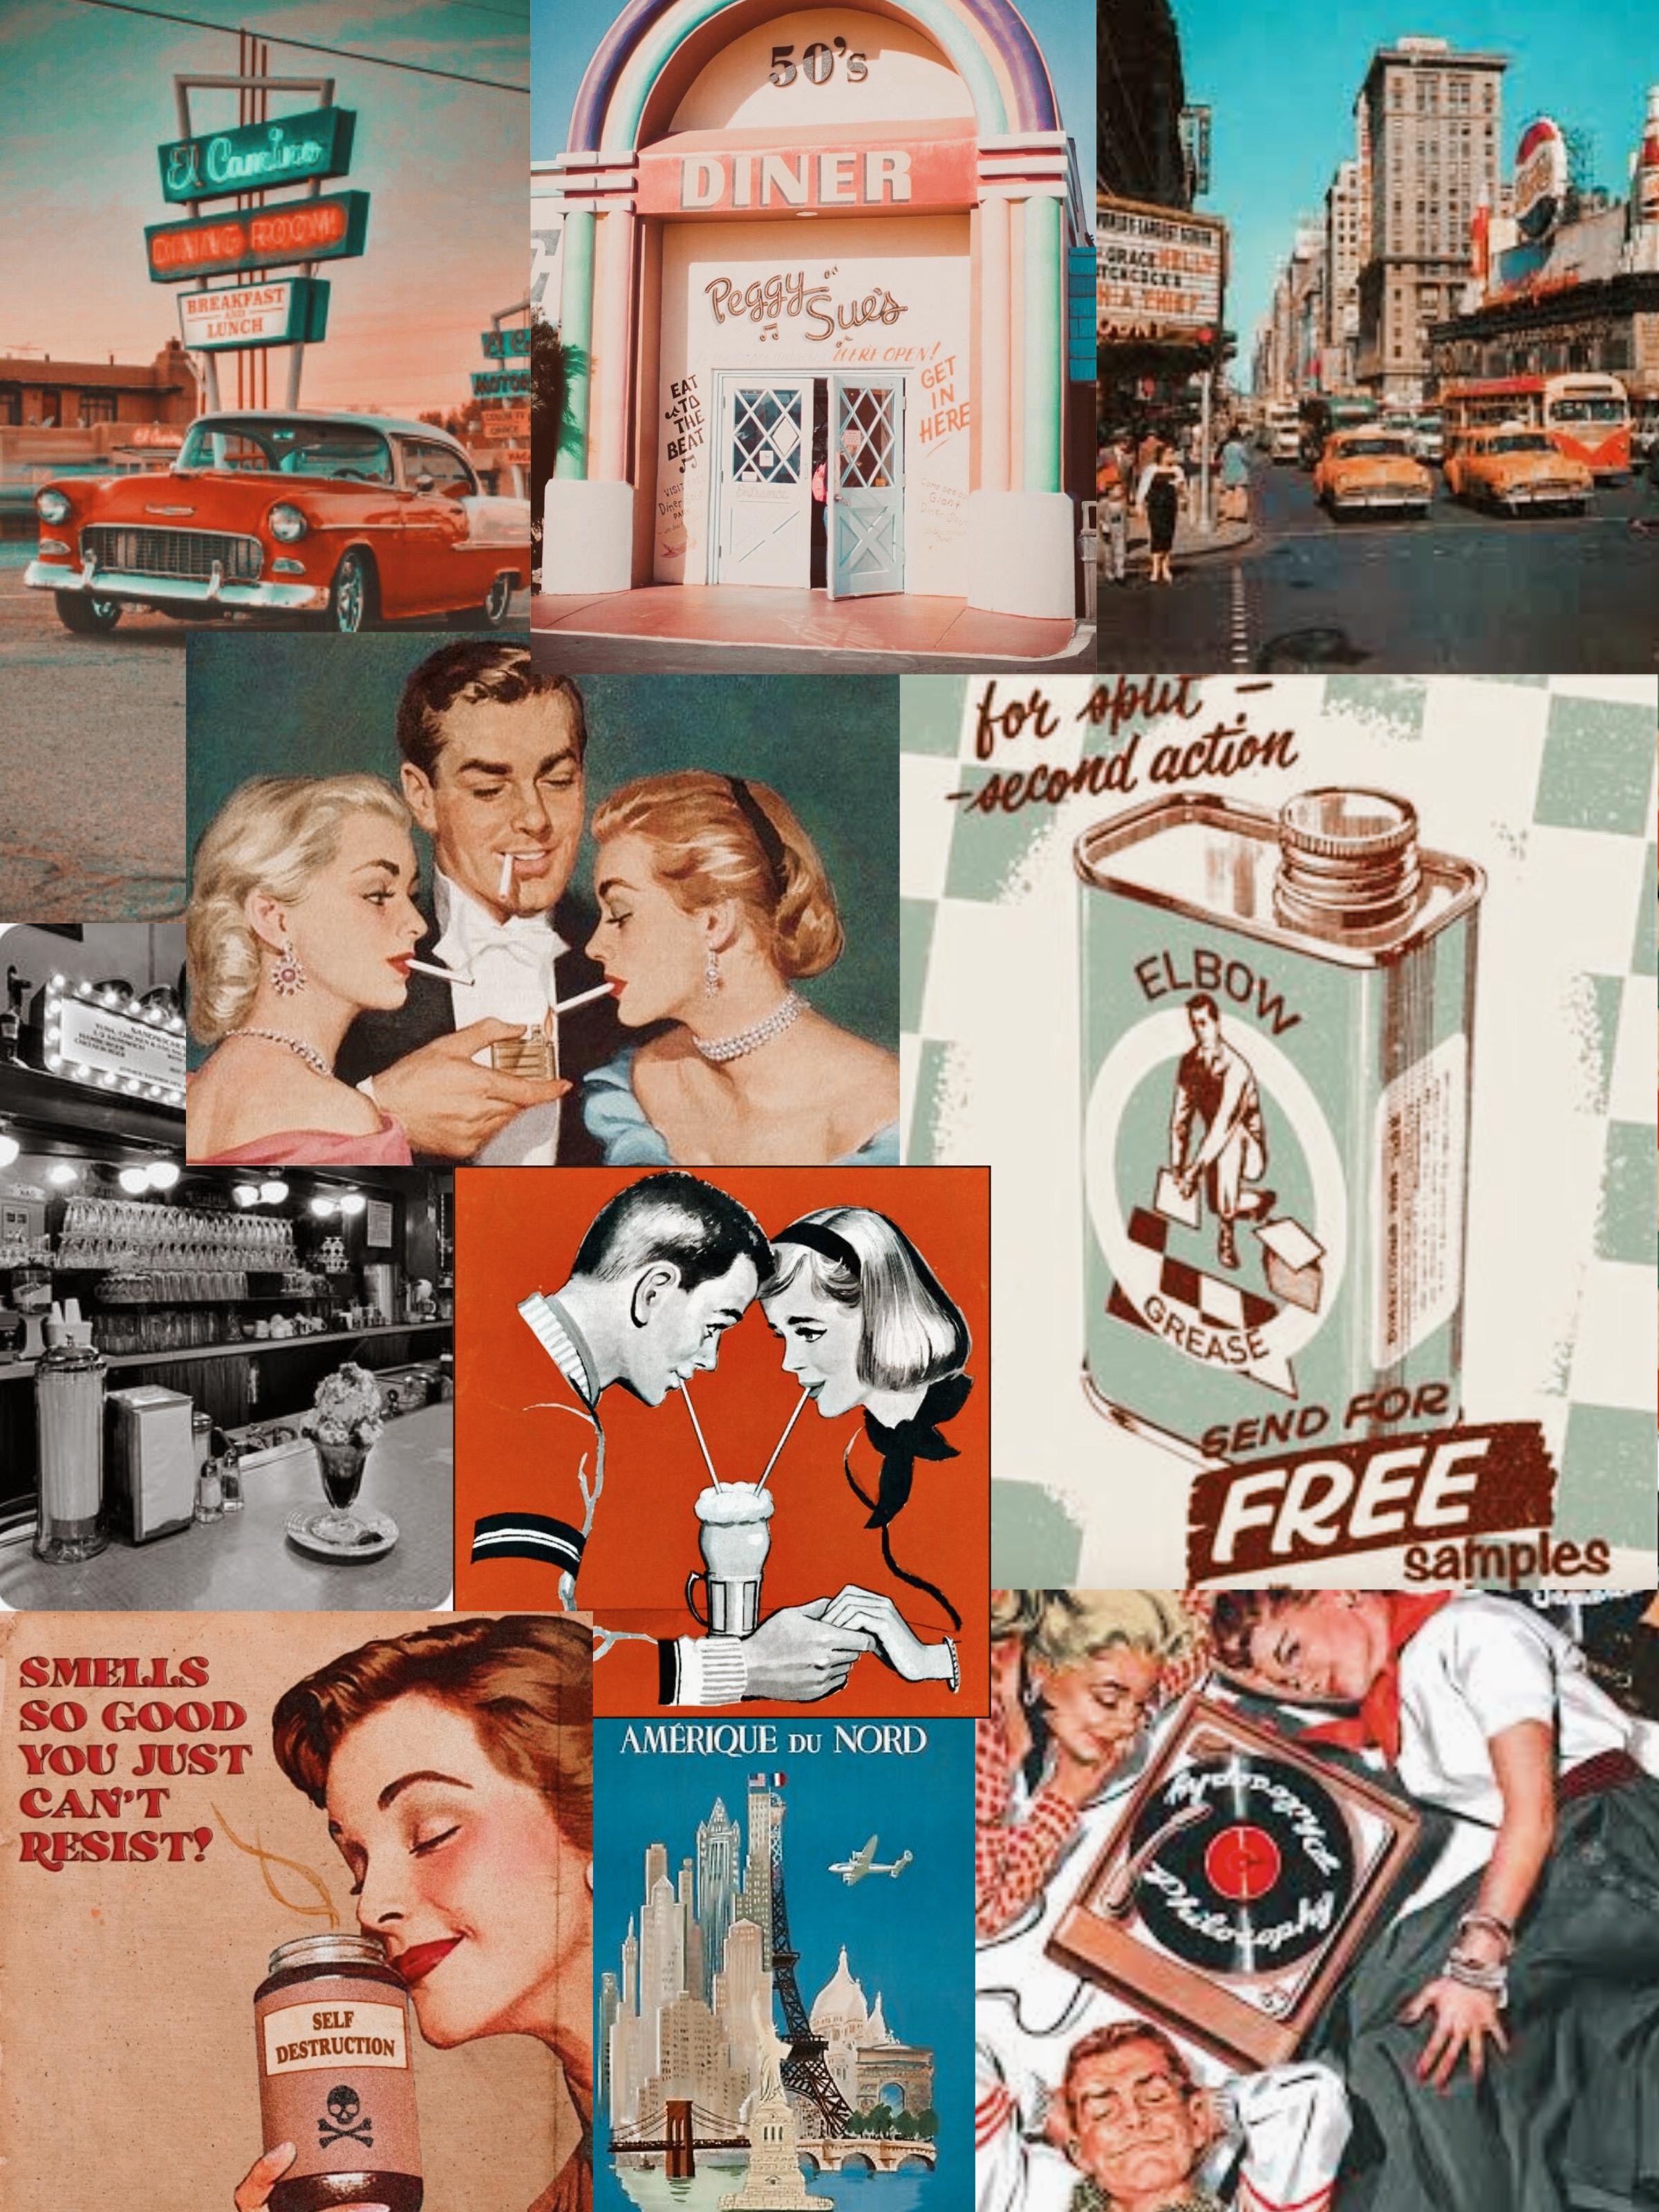 A collage of images from the 1950s, including a diner, cars, and advertisements. - 50s